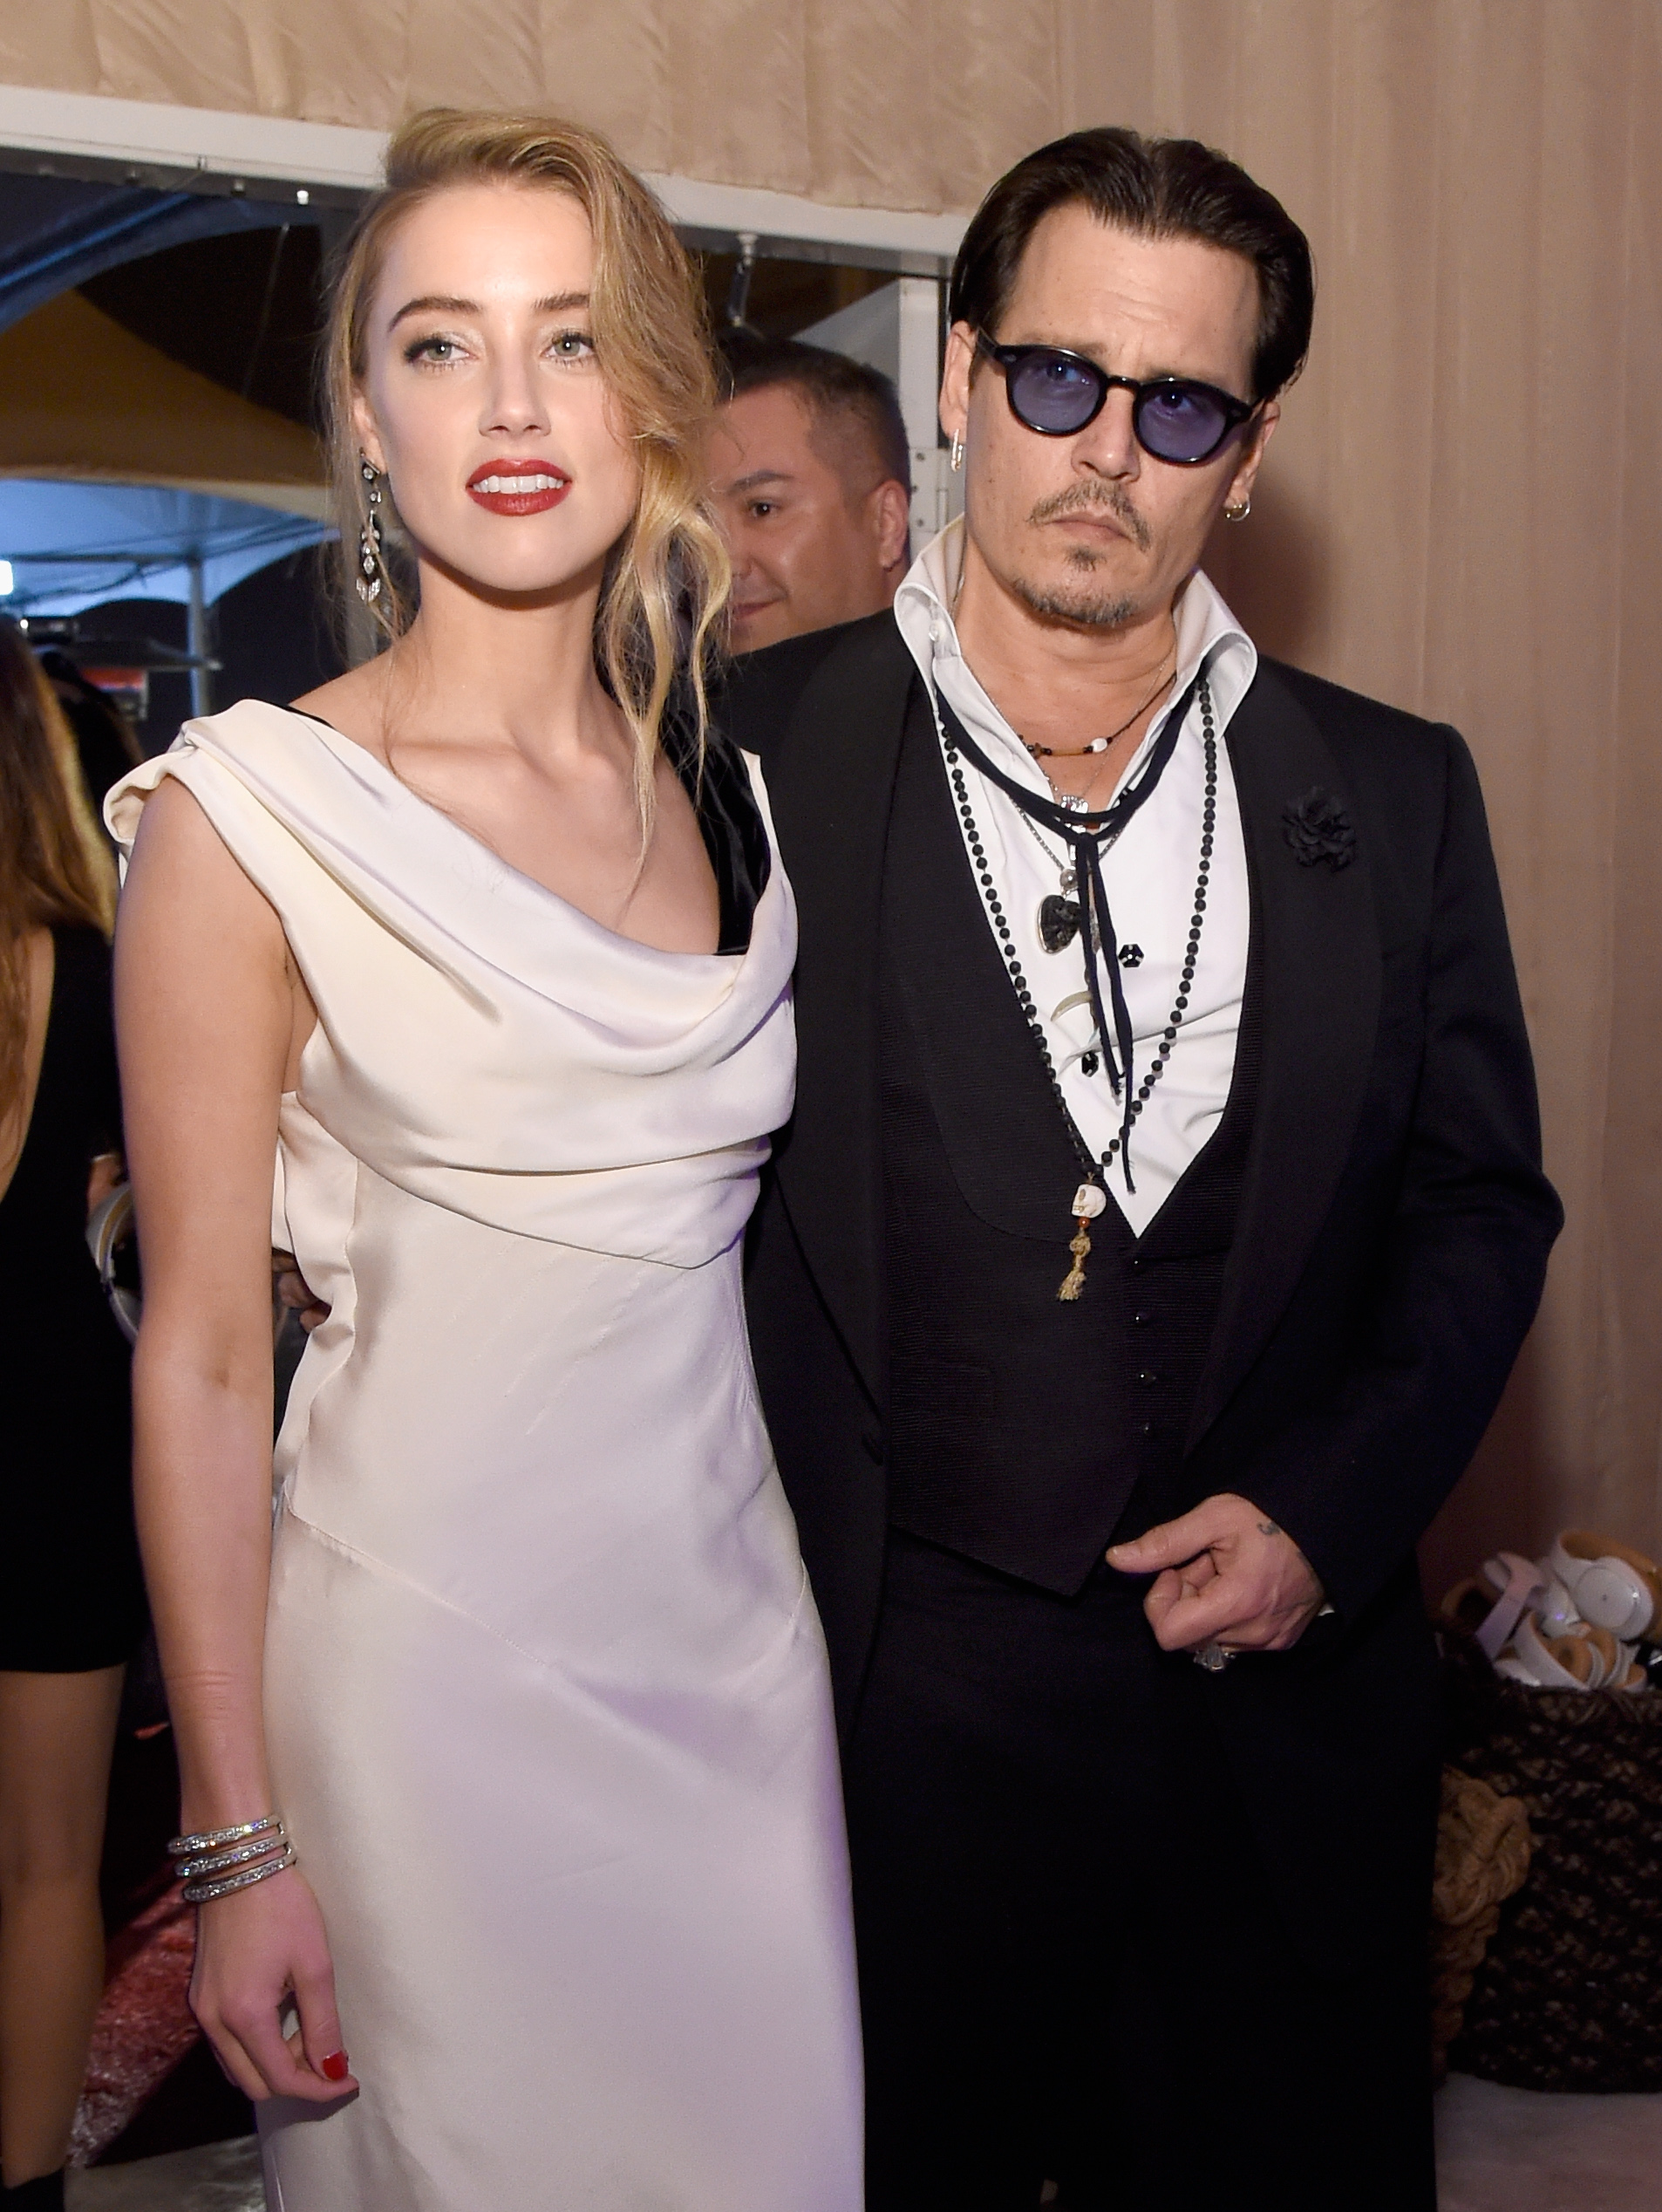 Amber Heard & Johnny Depp - The Art Of Elysium And Samsung Galaxy Present Marina Abramovic's HEAVEN, With Support From GREY GOOSE Vodka